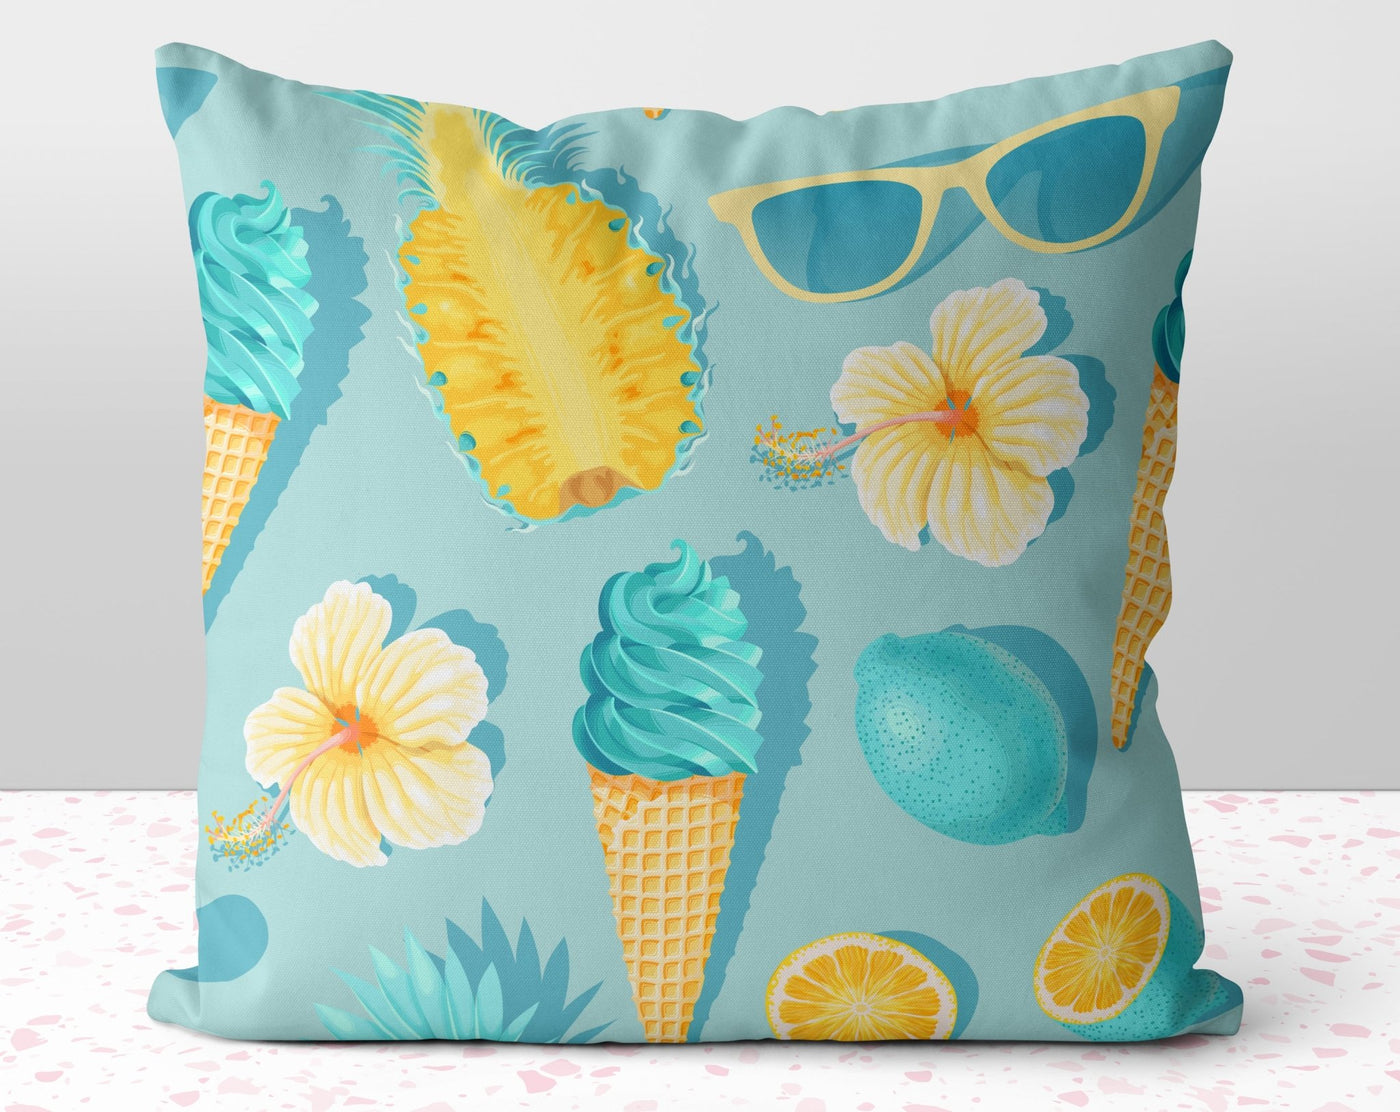 Summer Fun Teal Blue Square Pillow Cover Throw with Ice Cream Cones Pineapple Sunglasses Accents - Cush Potato Pillows